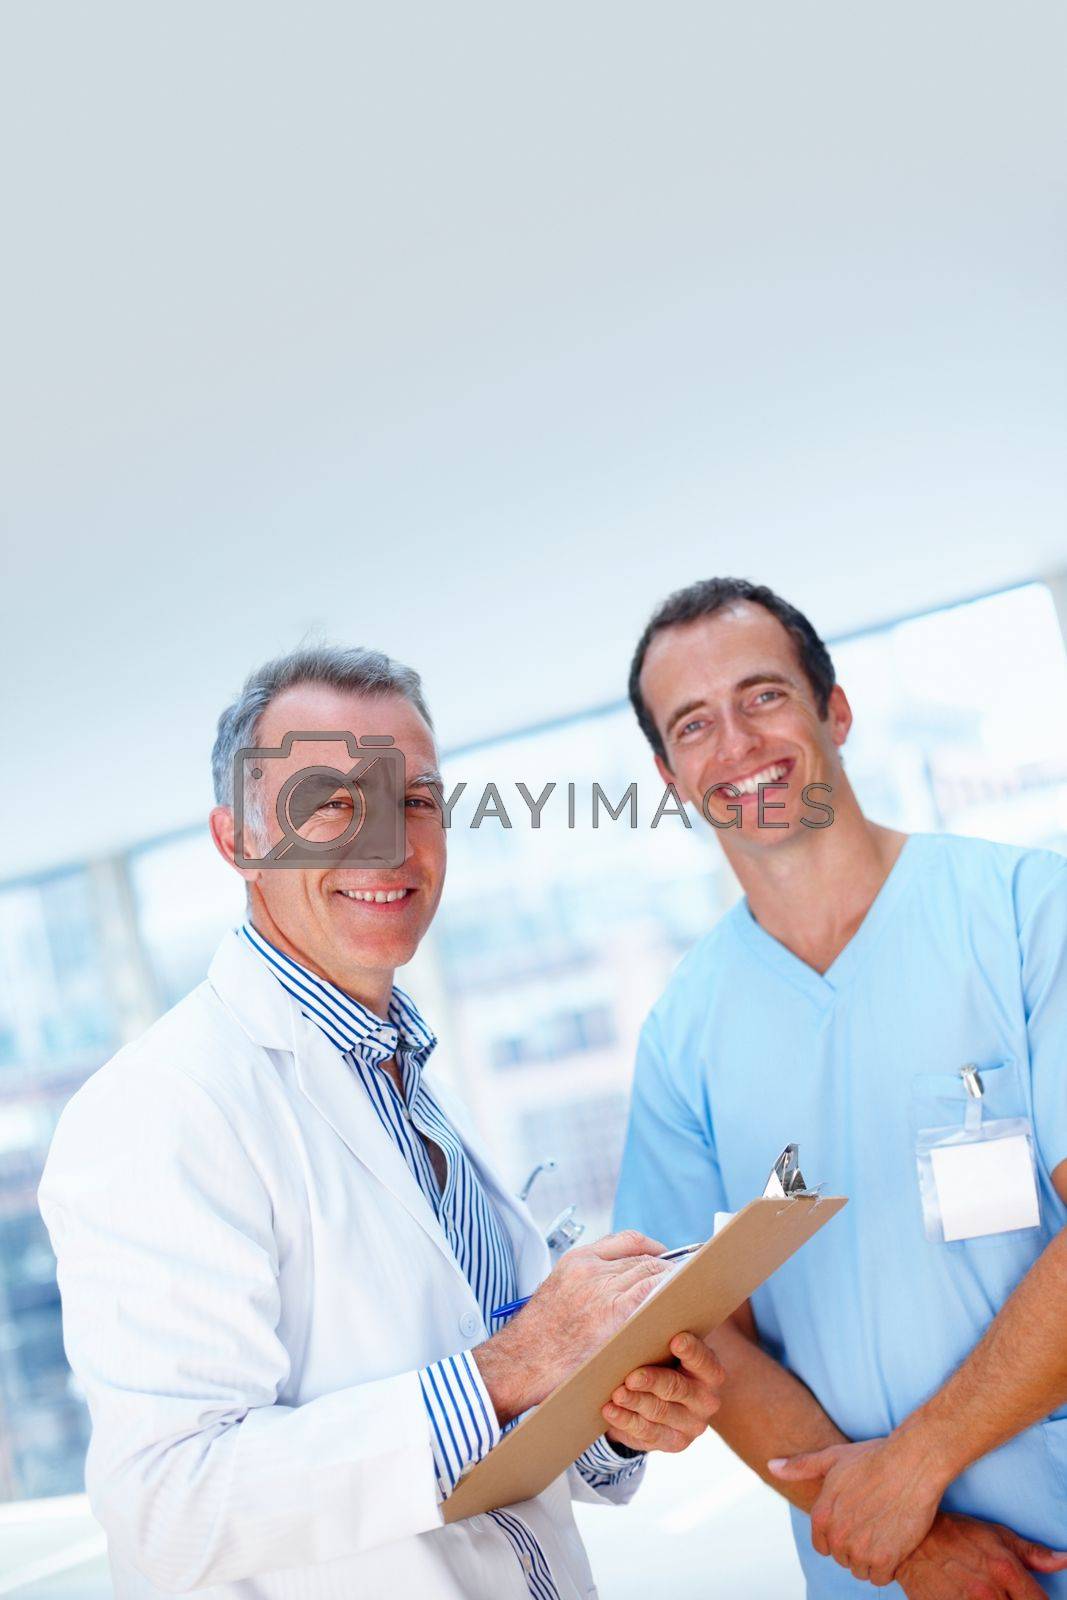 Royalty free image of Happy with diagnosis. Healthcare professionals posing with chart. by YuriArcurs